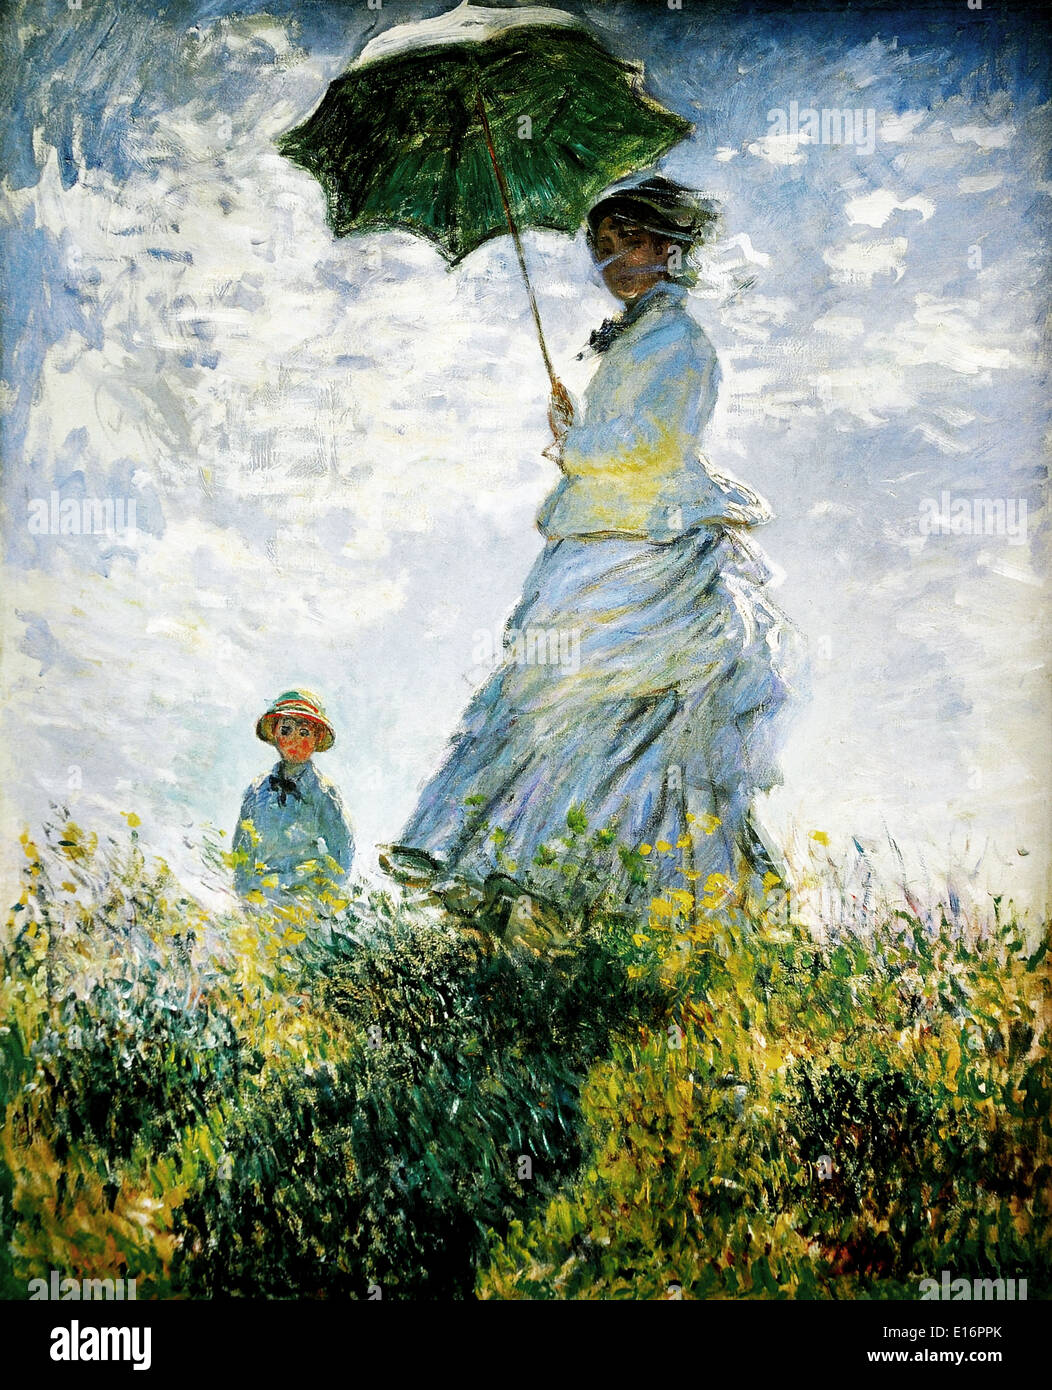 Woman with a Parasol by Claude Monet, 1875 Stock Photo - Alamy